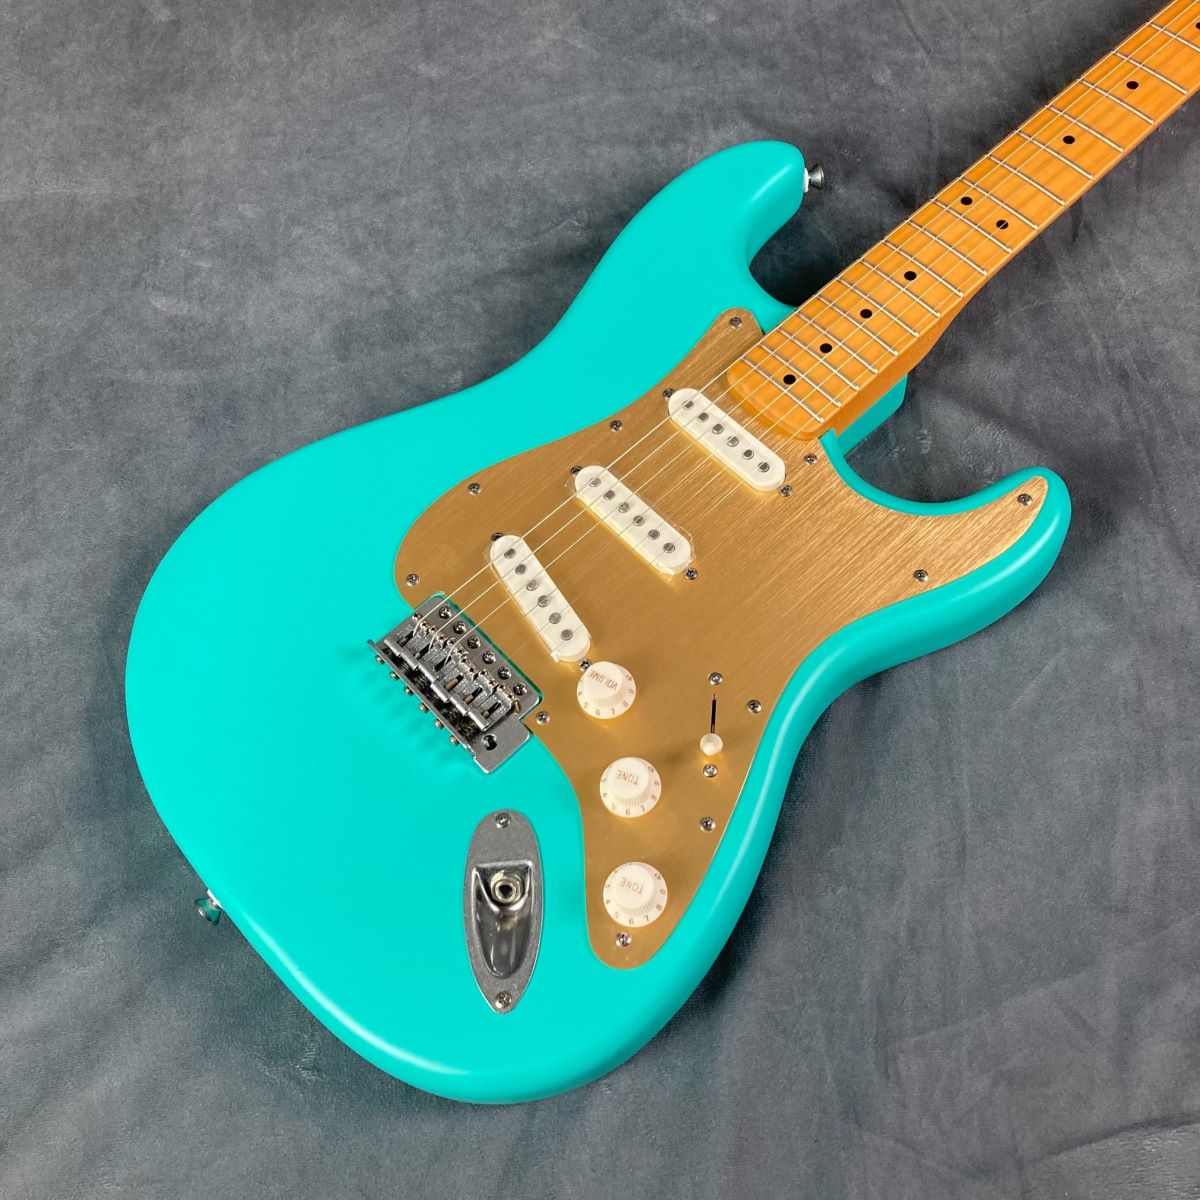 Squier by Fender40th Anniversary Stratocaster Vintage Edition Satin Sea Foam Green